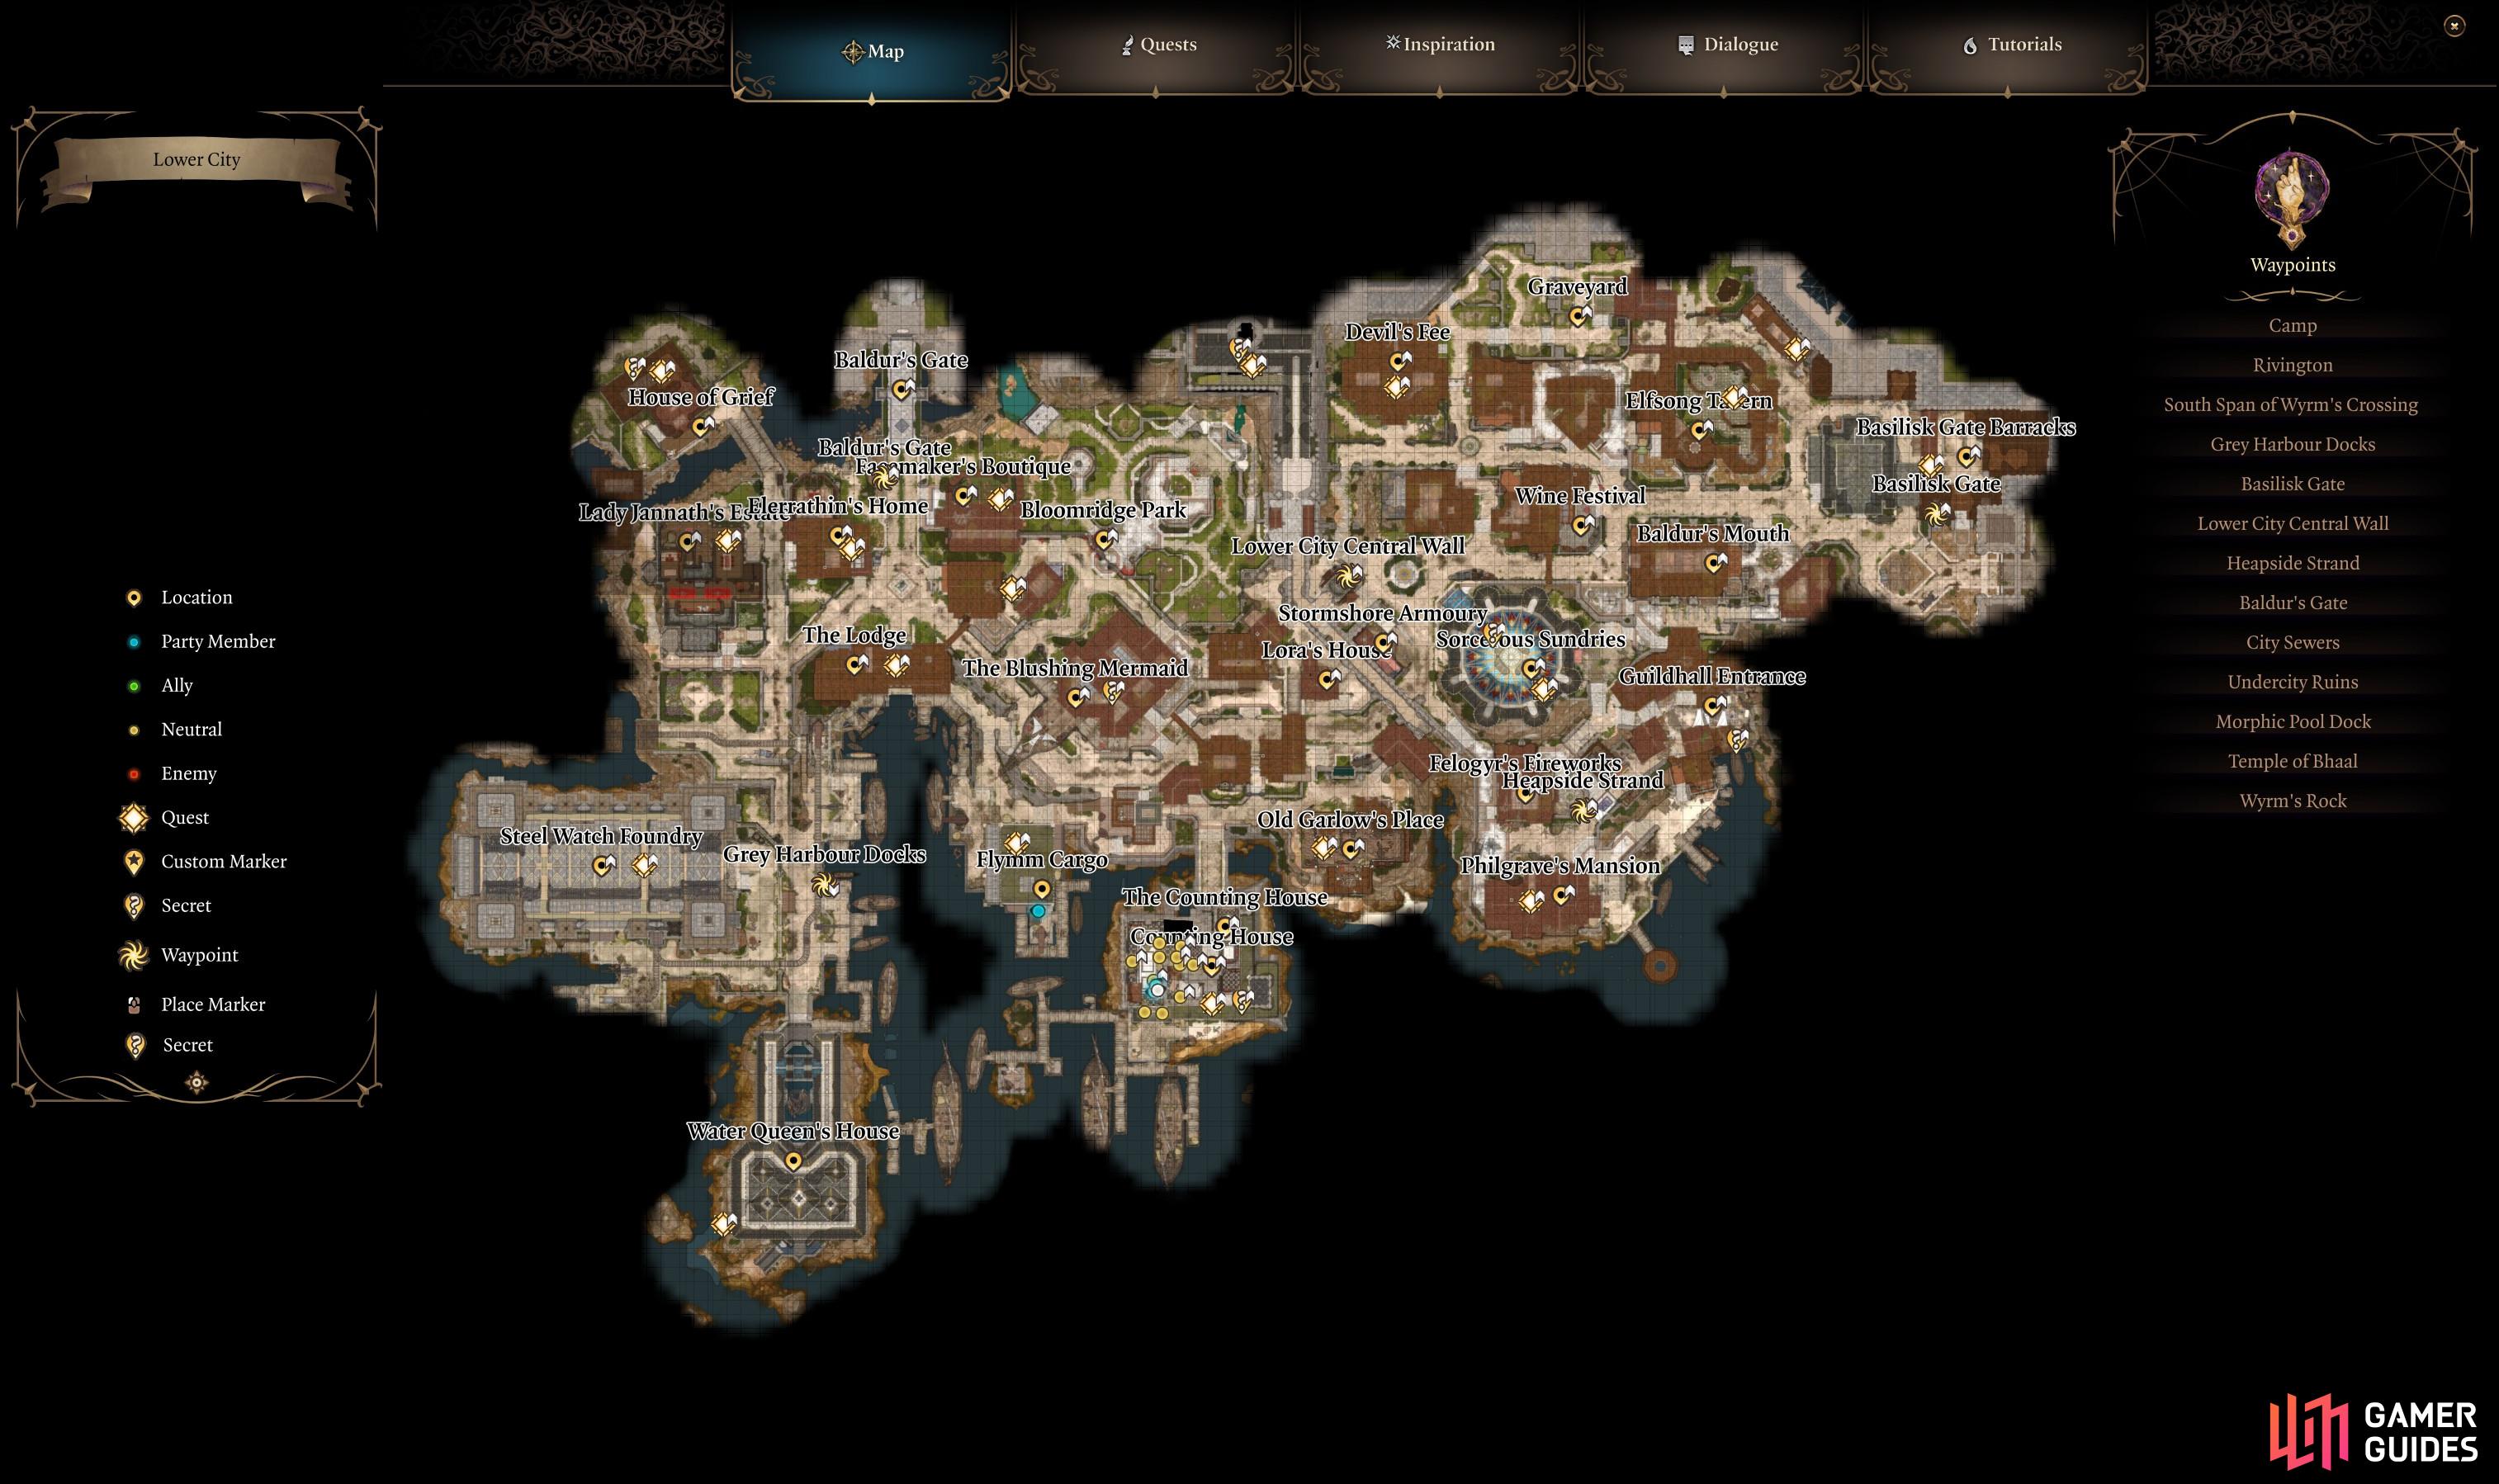 Baldur's Gate 3 complete prison guide: Break out of jail, live as an outlaw